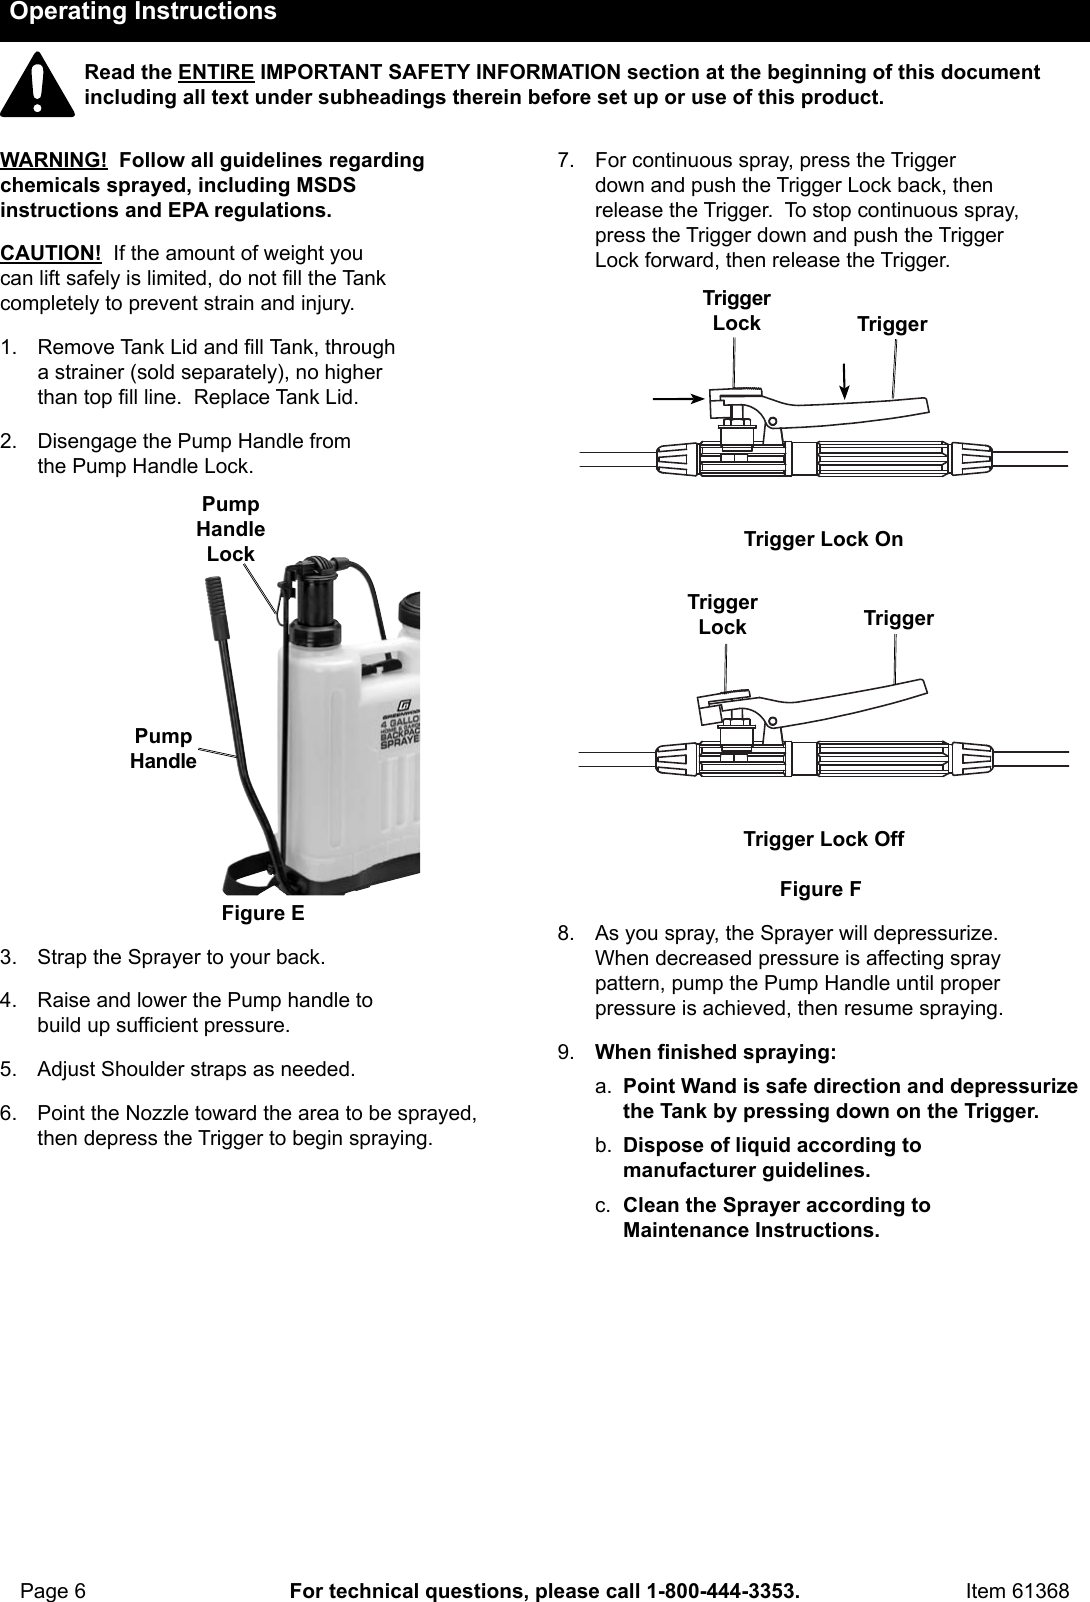 Page 6 of 12 - Harbor-Freight Harbor-Freight-4-Gal-Backpack-Sprayer-Product-Manual-  Harbor-freight-4-gal-backpack-sprayer-product-manual